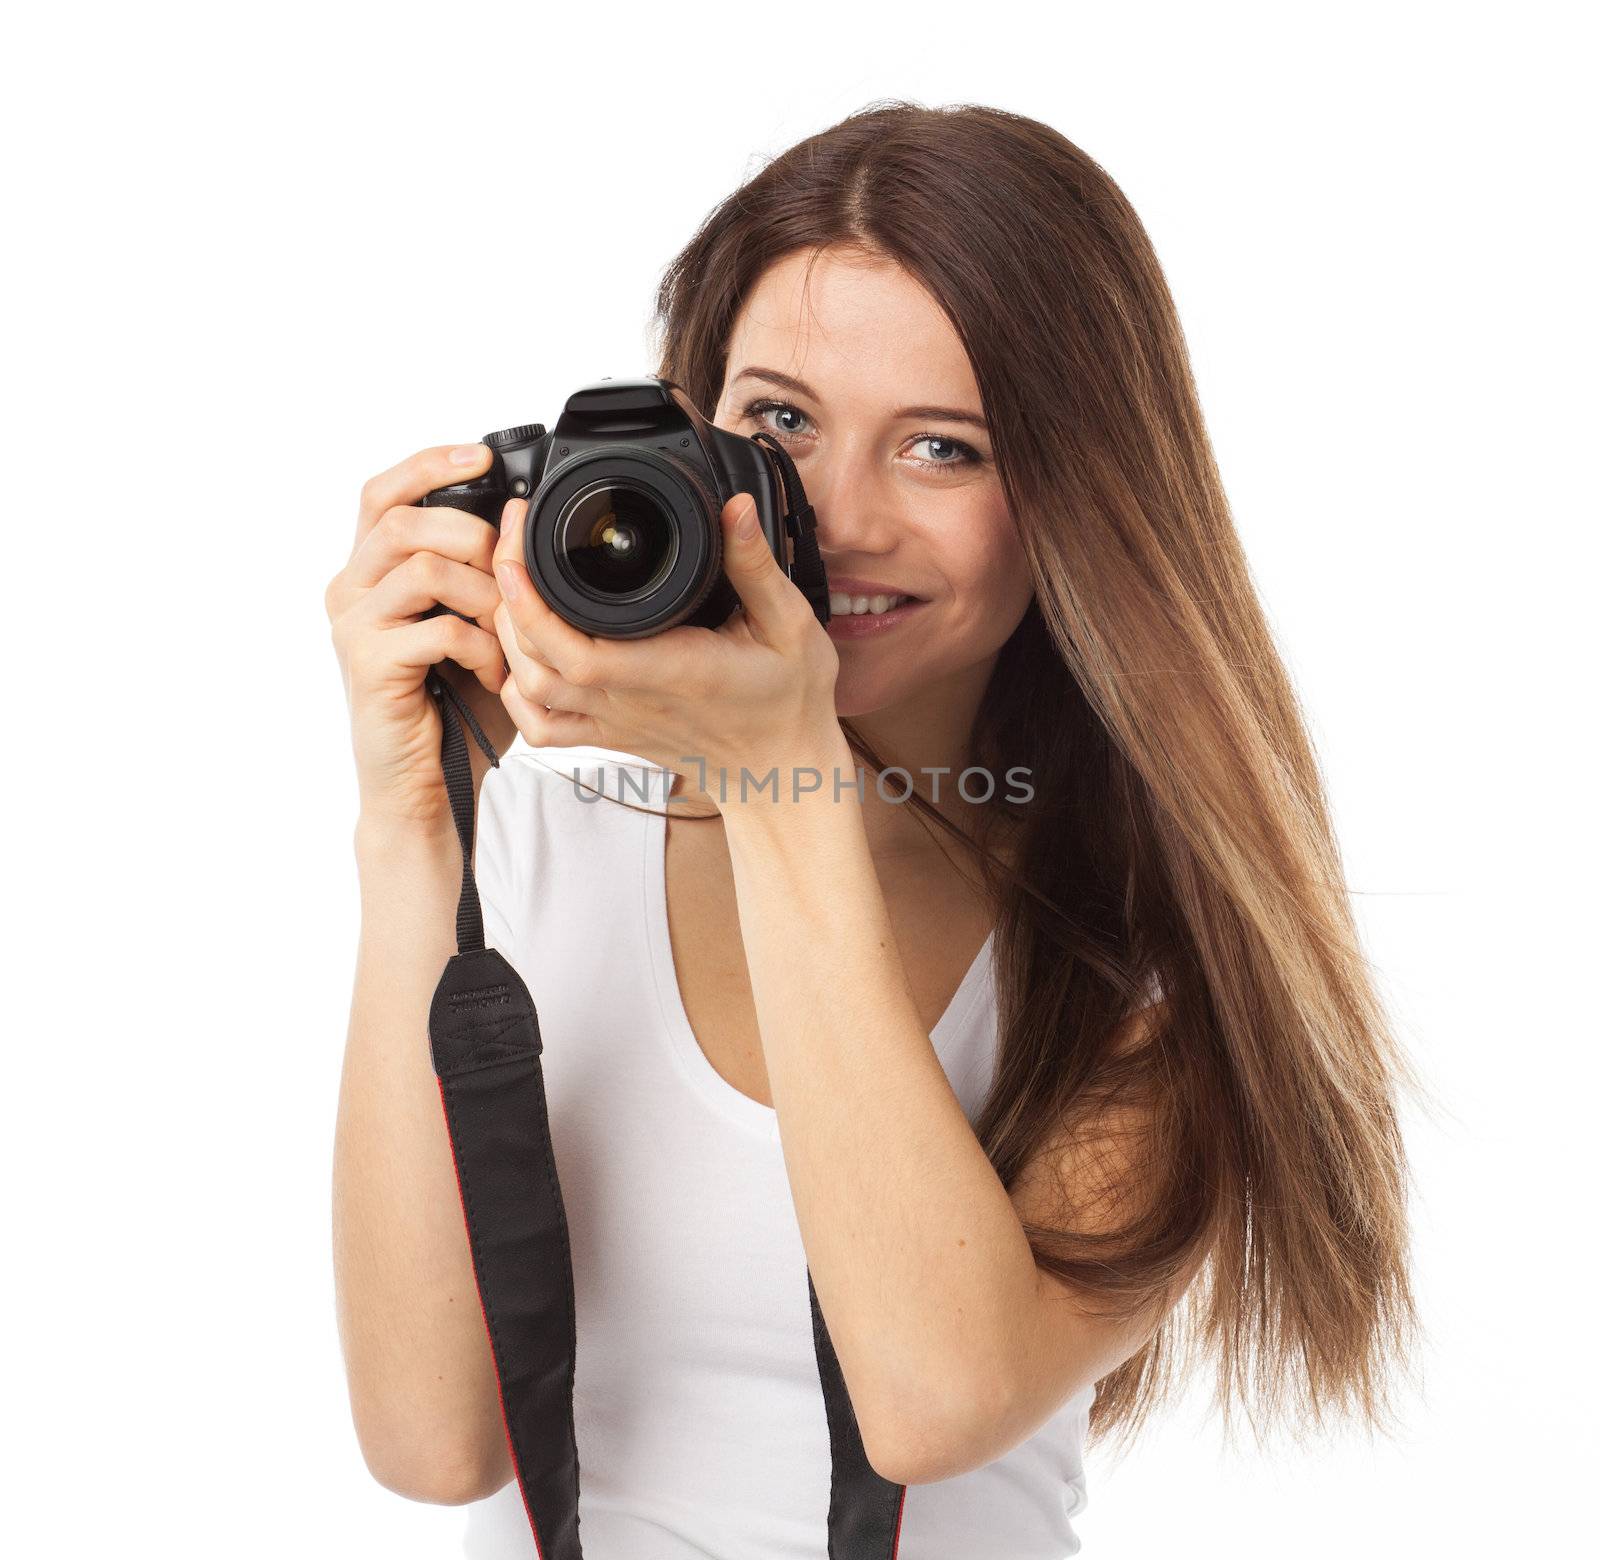 Cute smile and digital camera
Young woman with camera and smiling, isolated on white